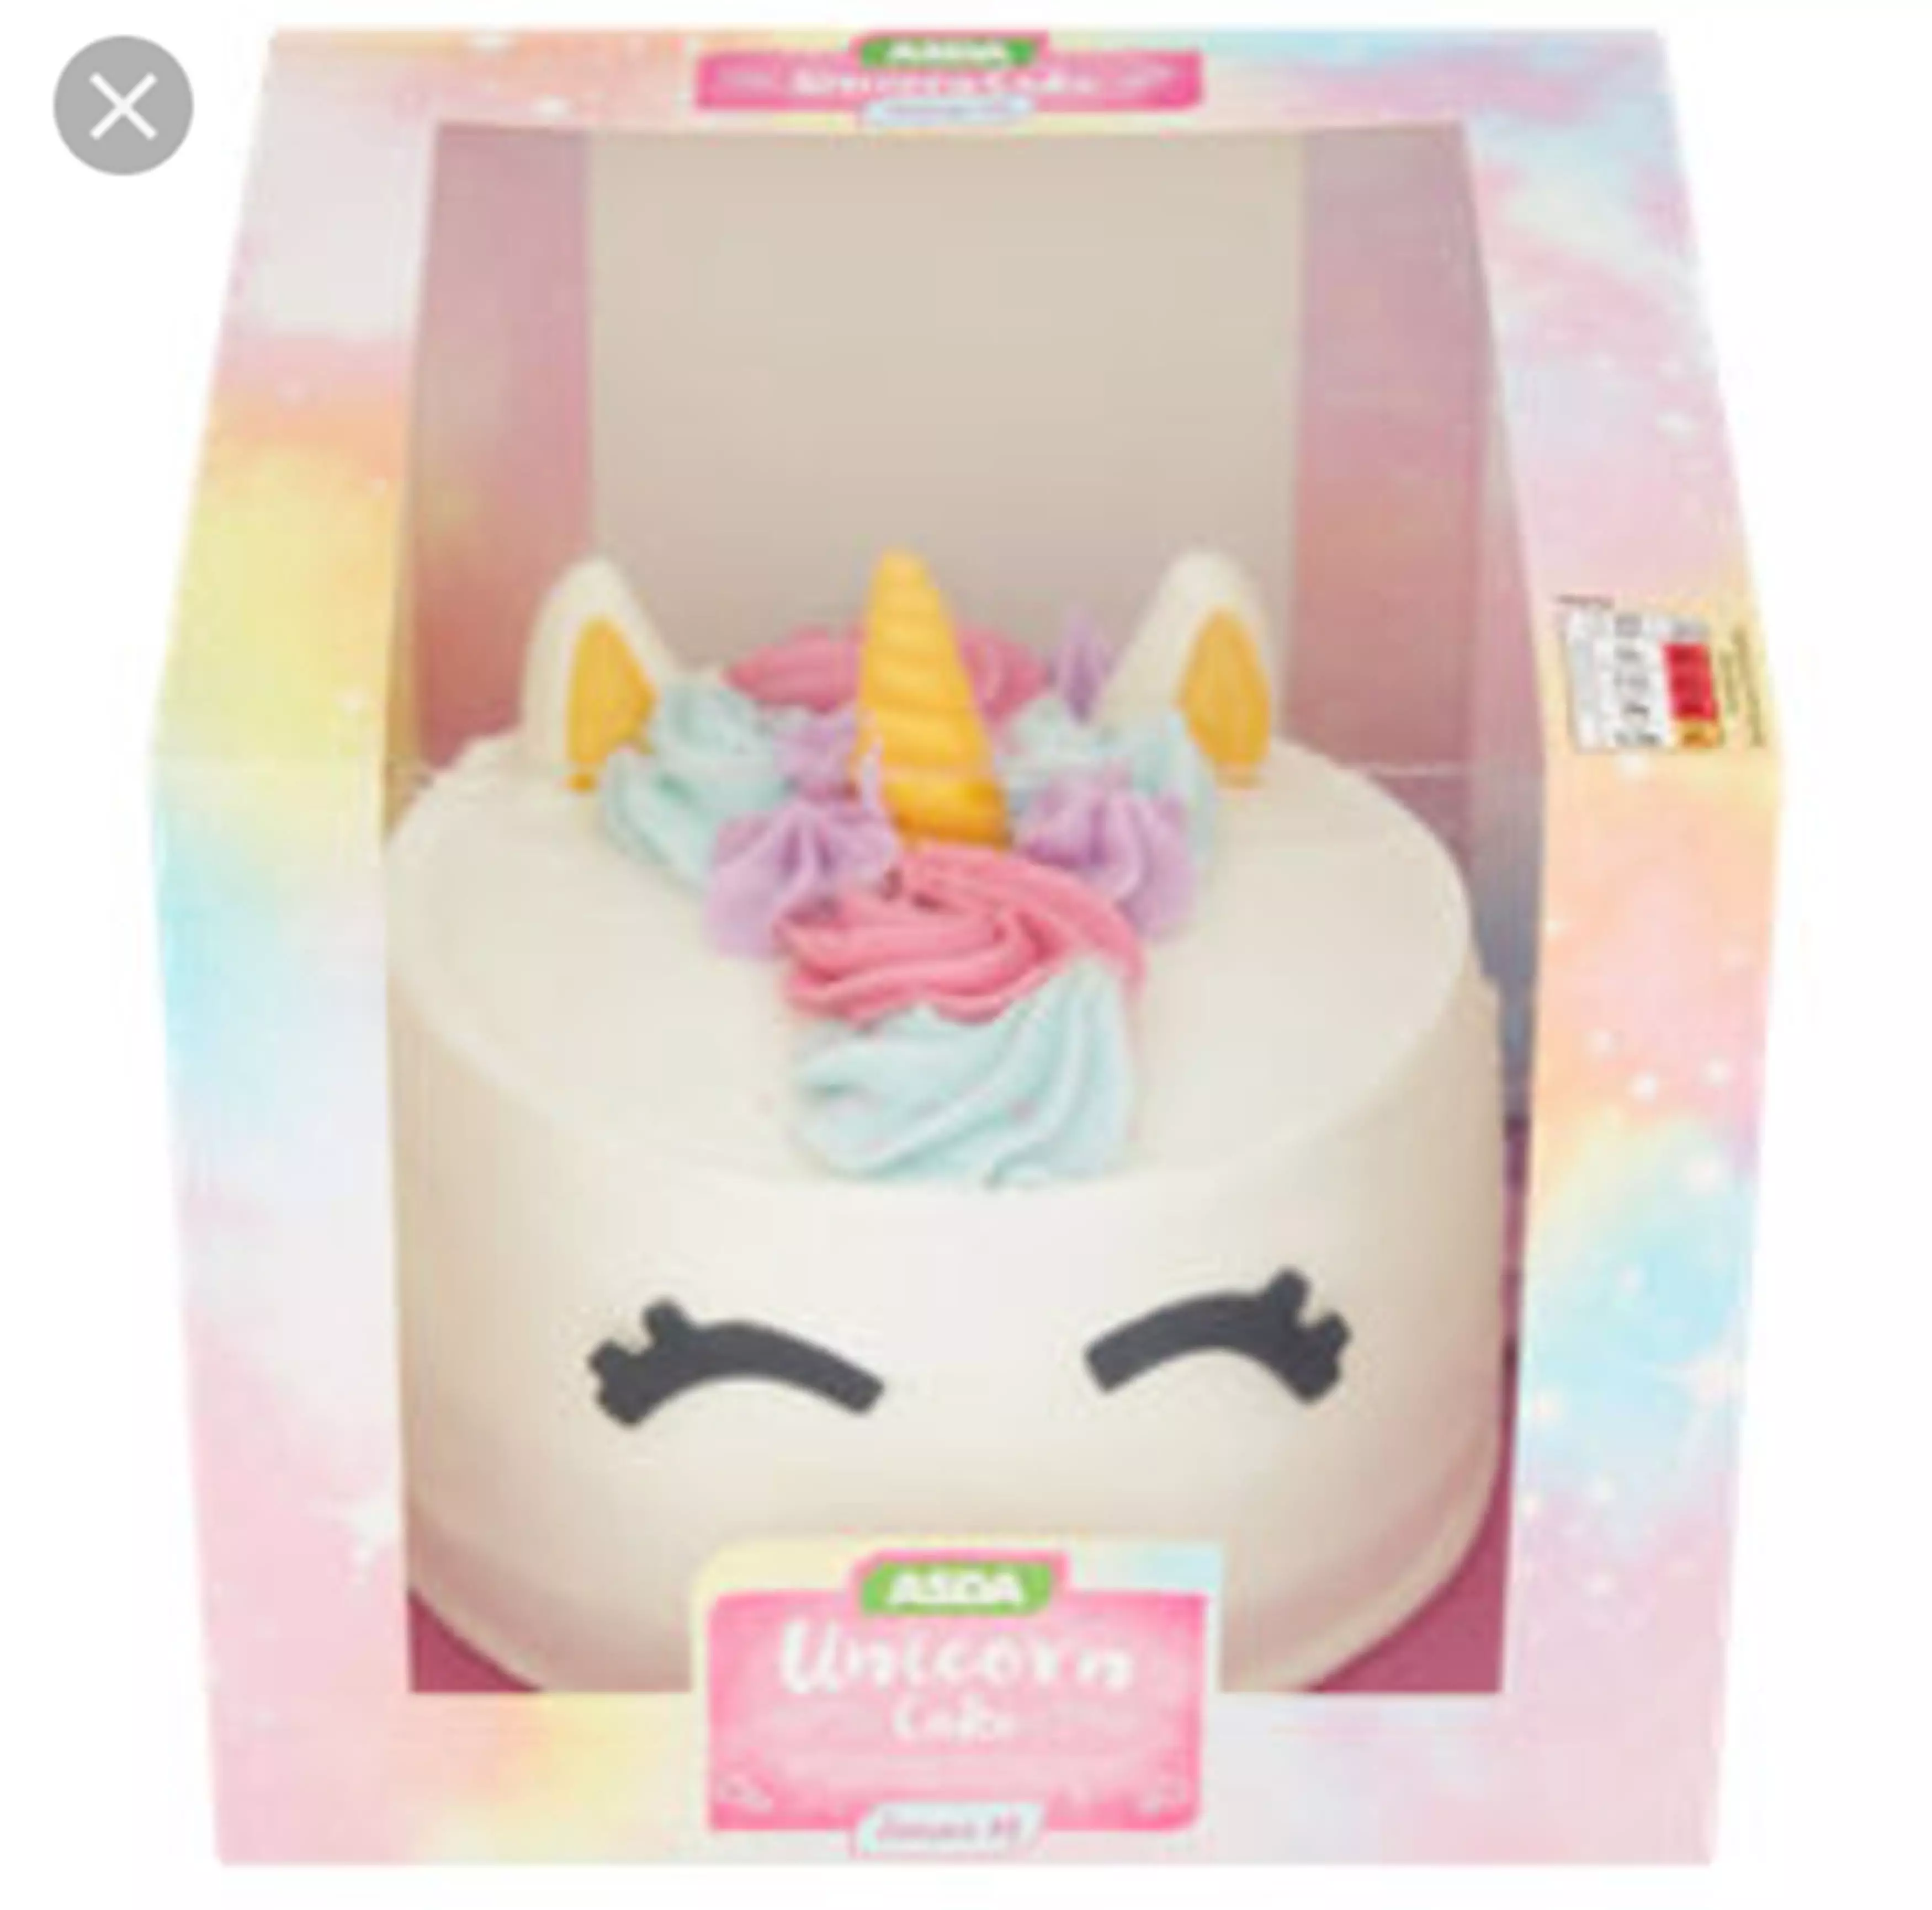 This is how she hoped the unicorn cake would turn out.